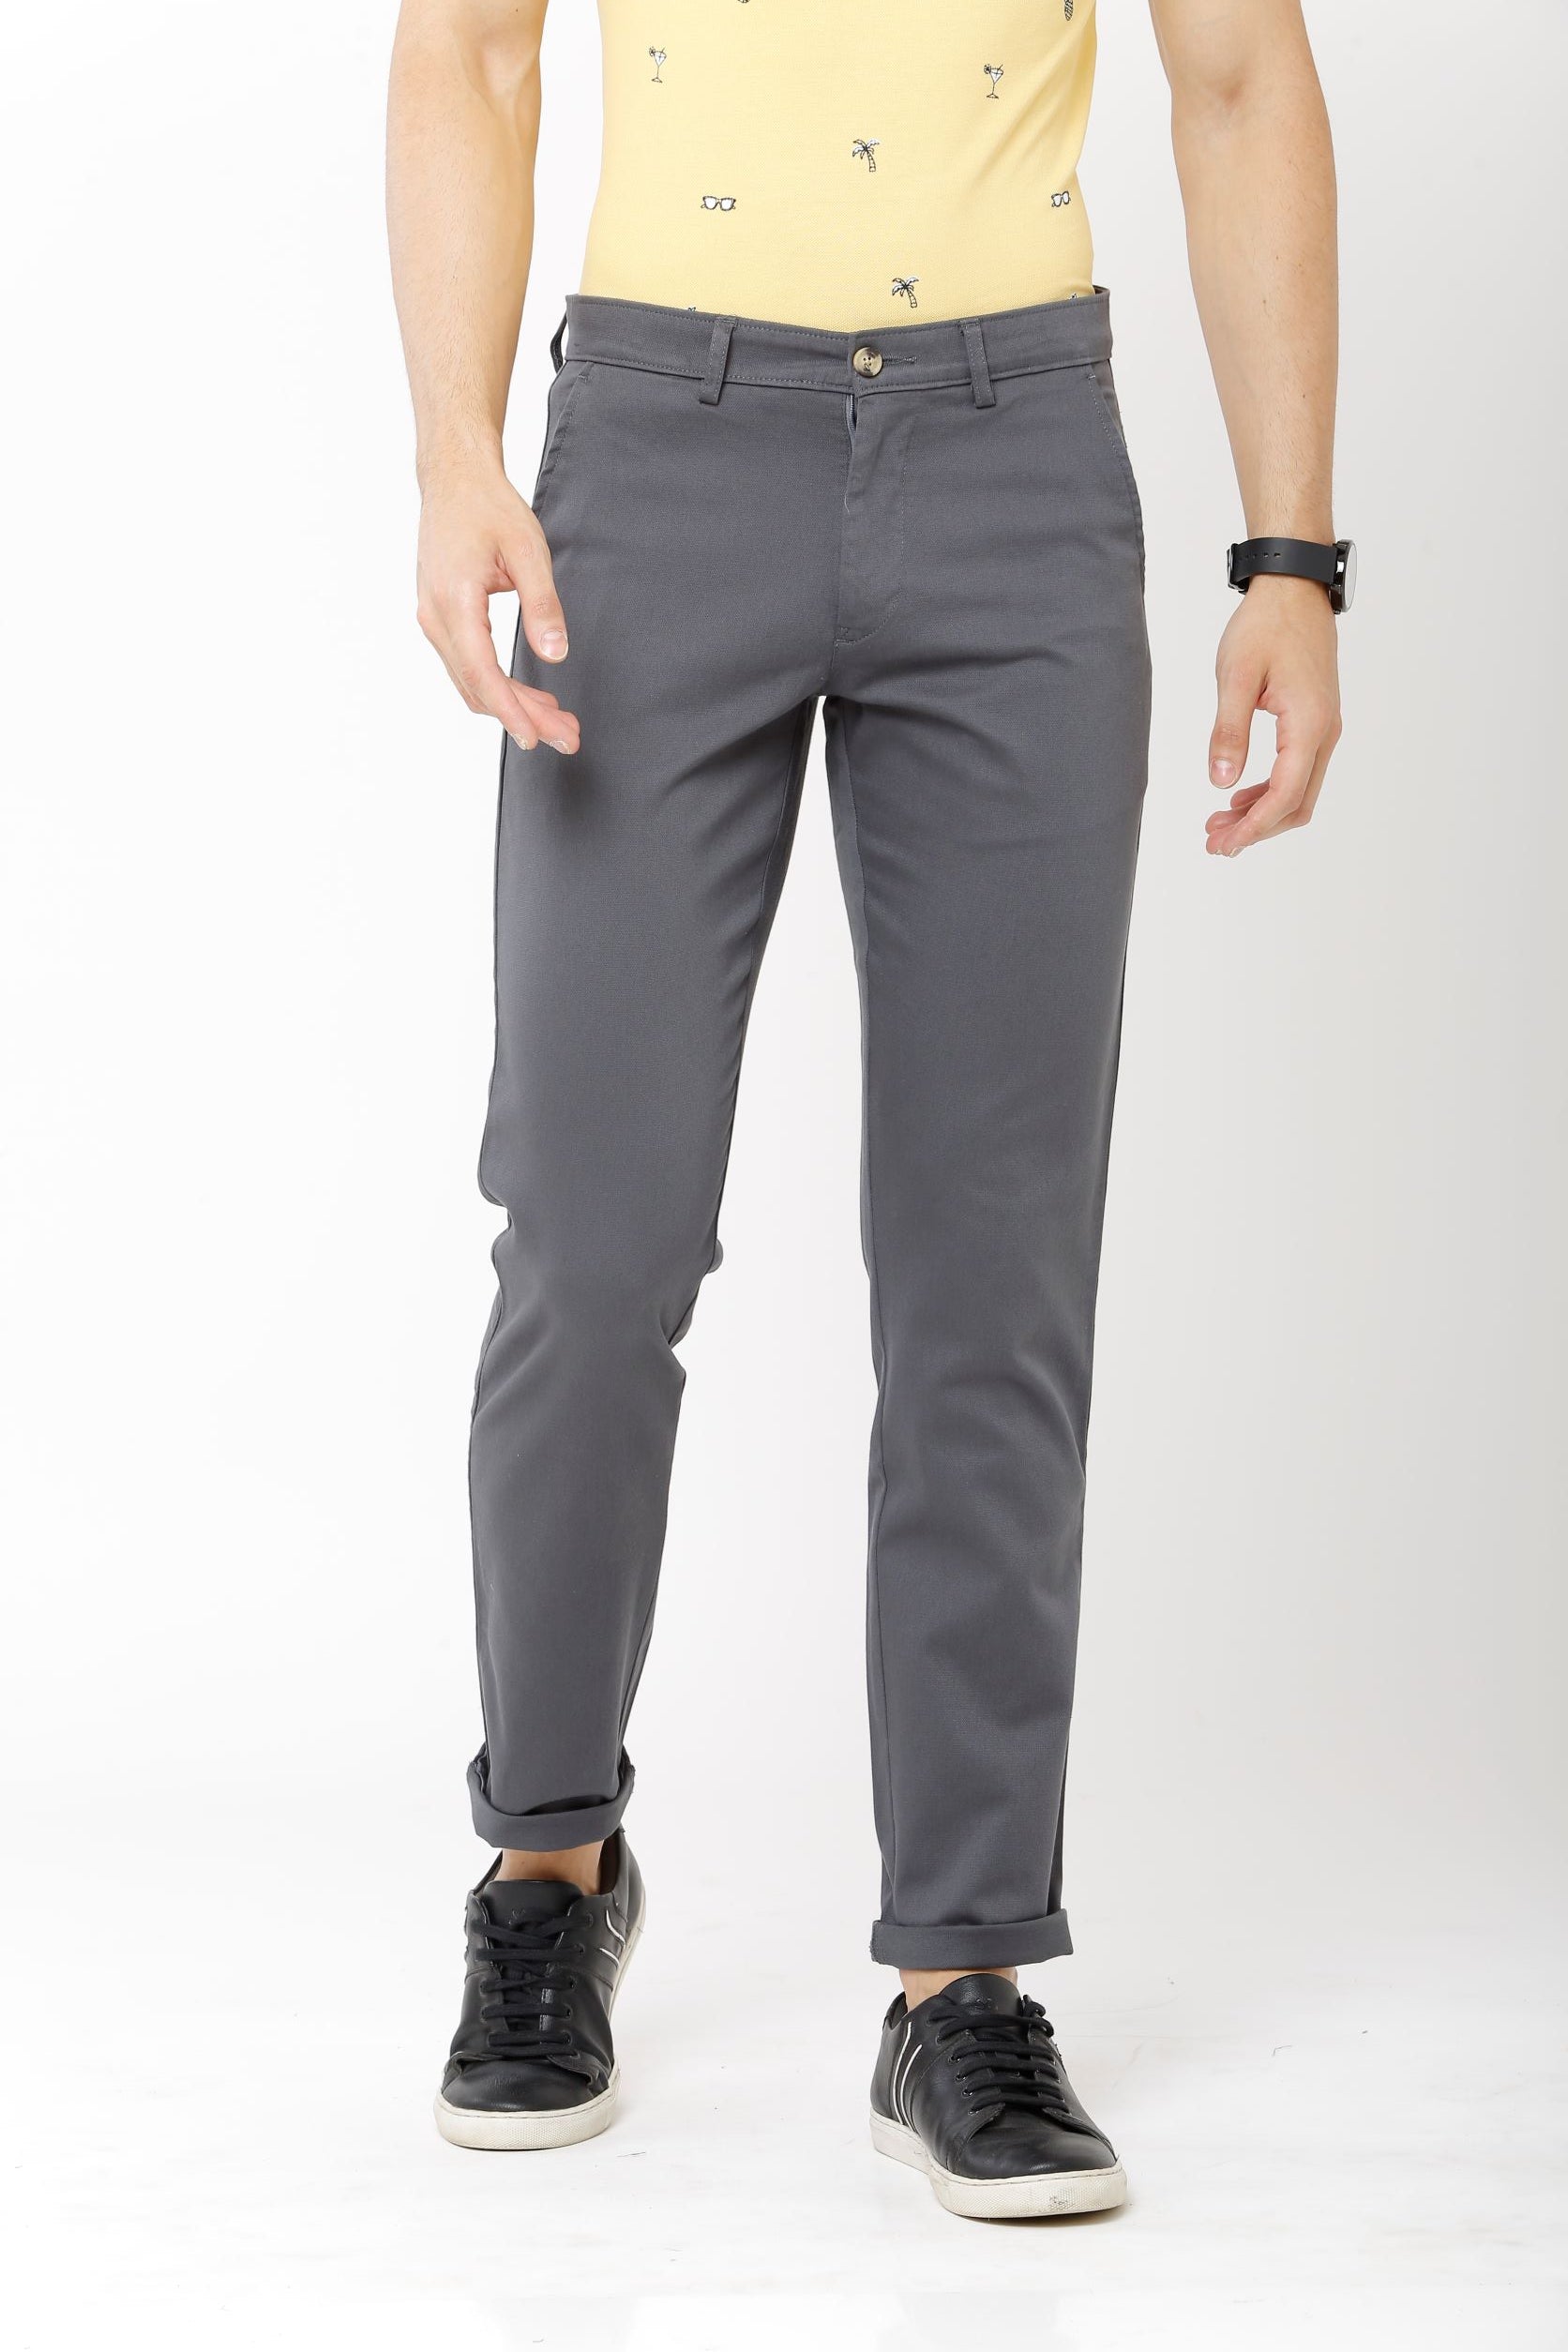 Classic Polo Mens 100% Cotton Solid Slim Fit Dark Grey Color Trousers -  Eros D.Grey